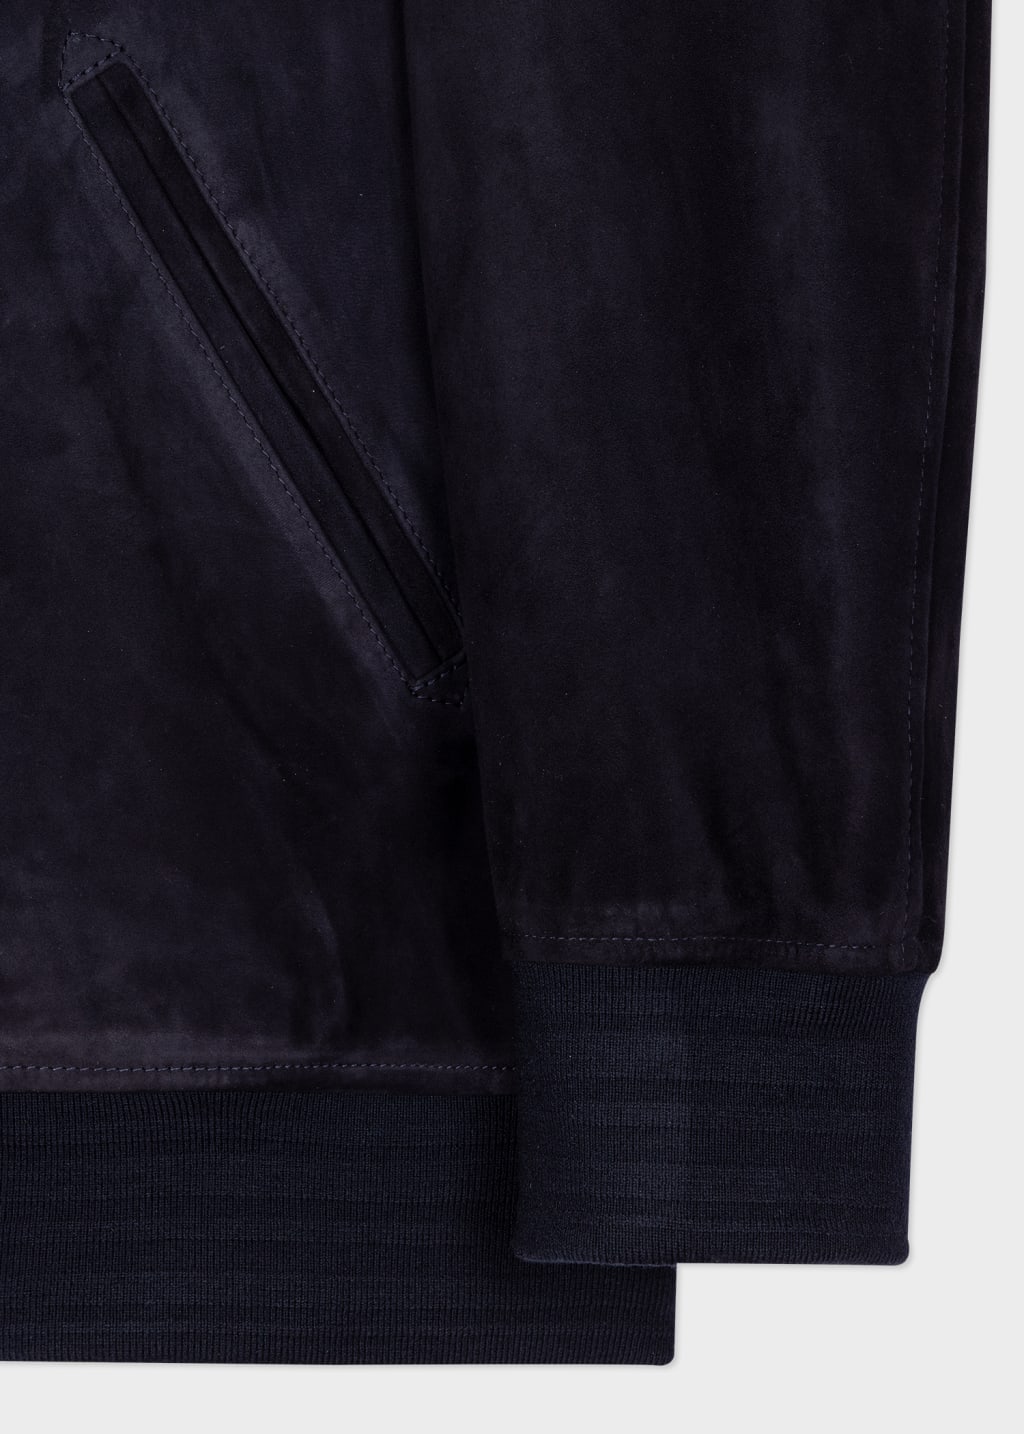 Detail View - Dark Navy Suede Leather Bomber Jacket Paul Smith